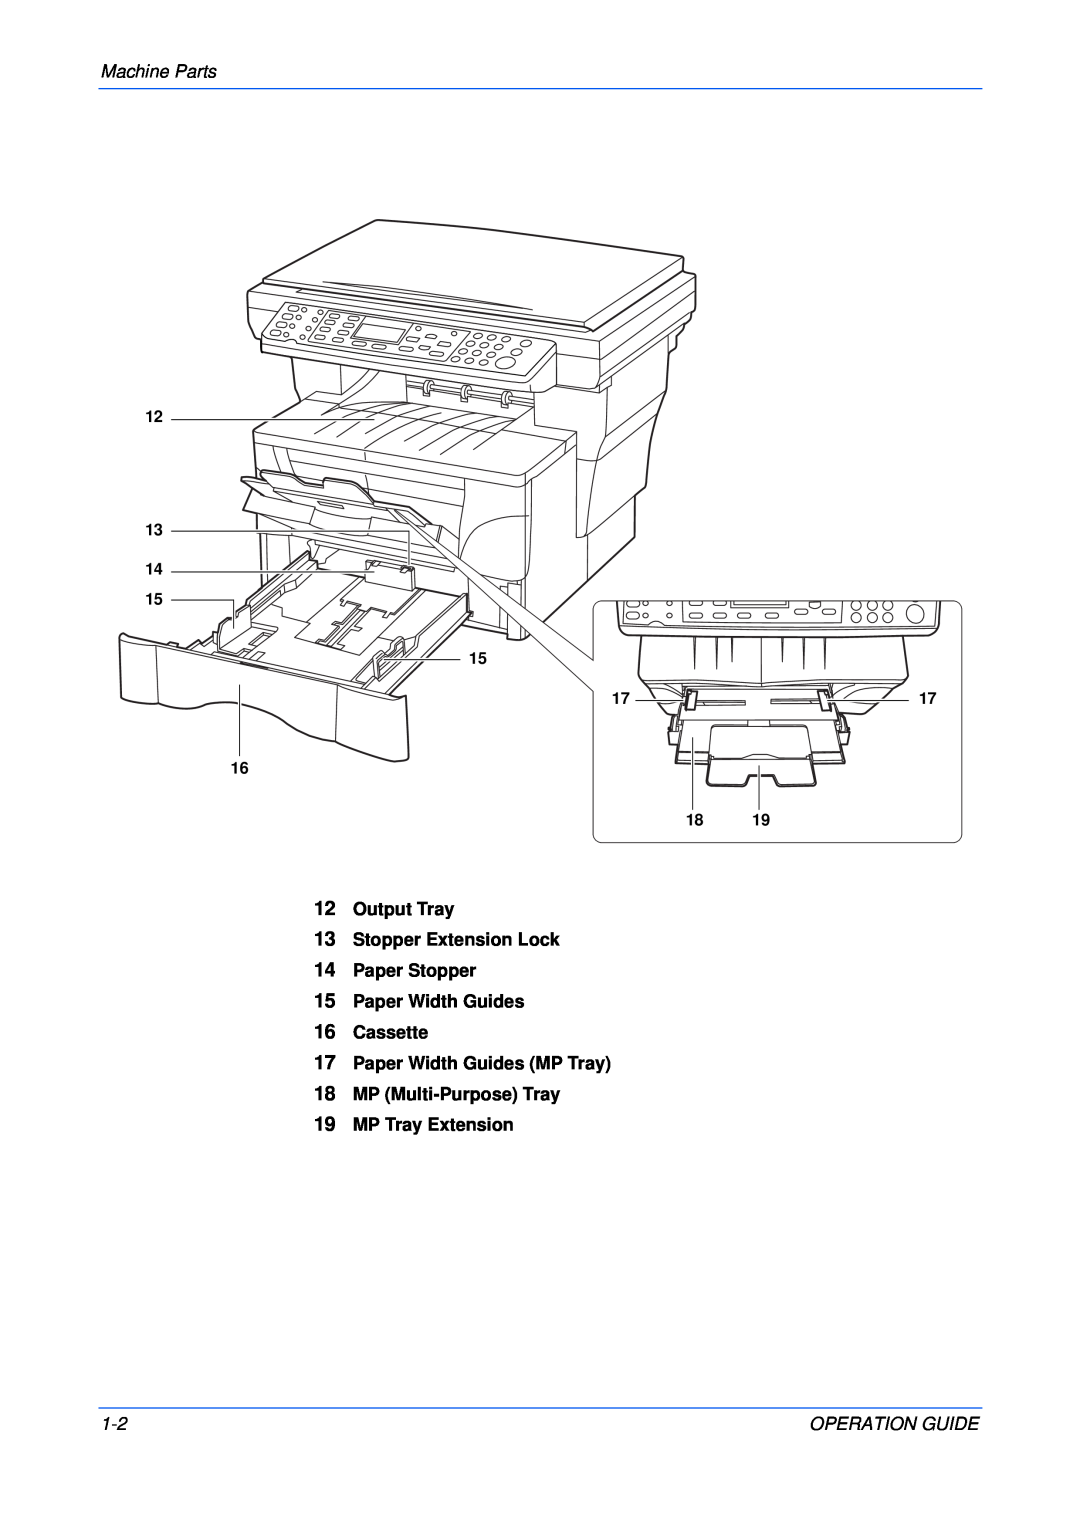 Olivetti 18MF manual Machine Parts, Output Tray 13 Stopper Extension Lock 14 Paper Stopper, Operation Guide 